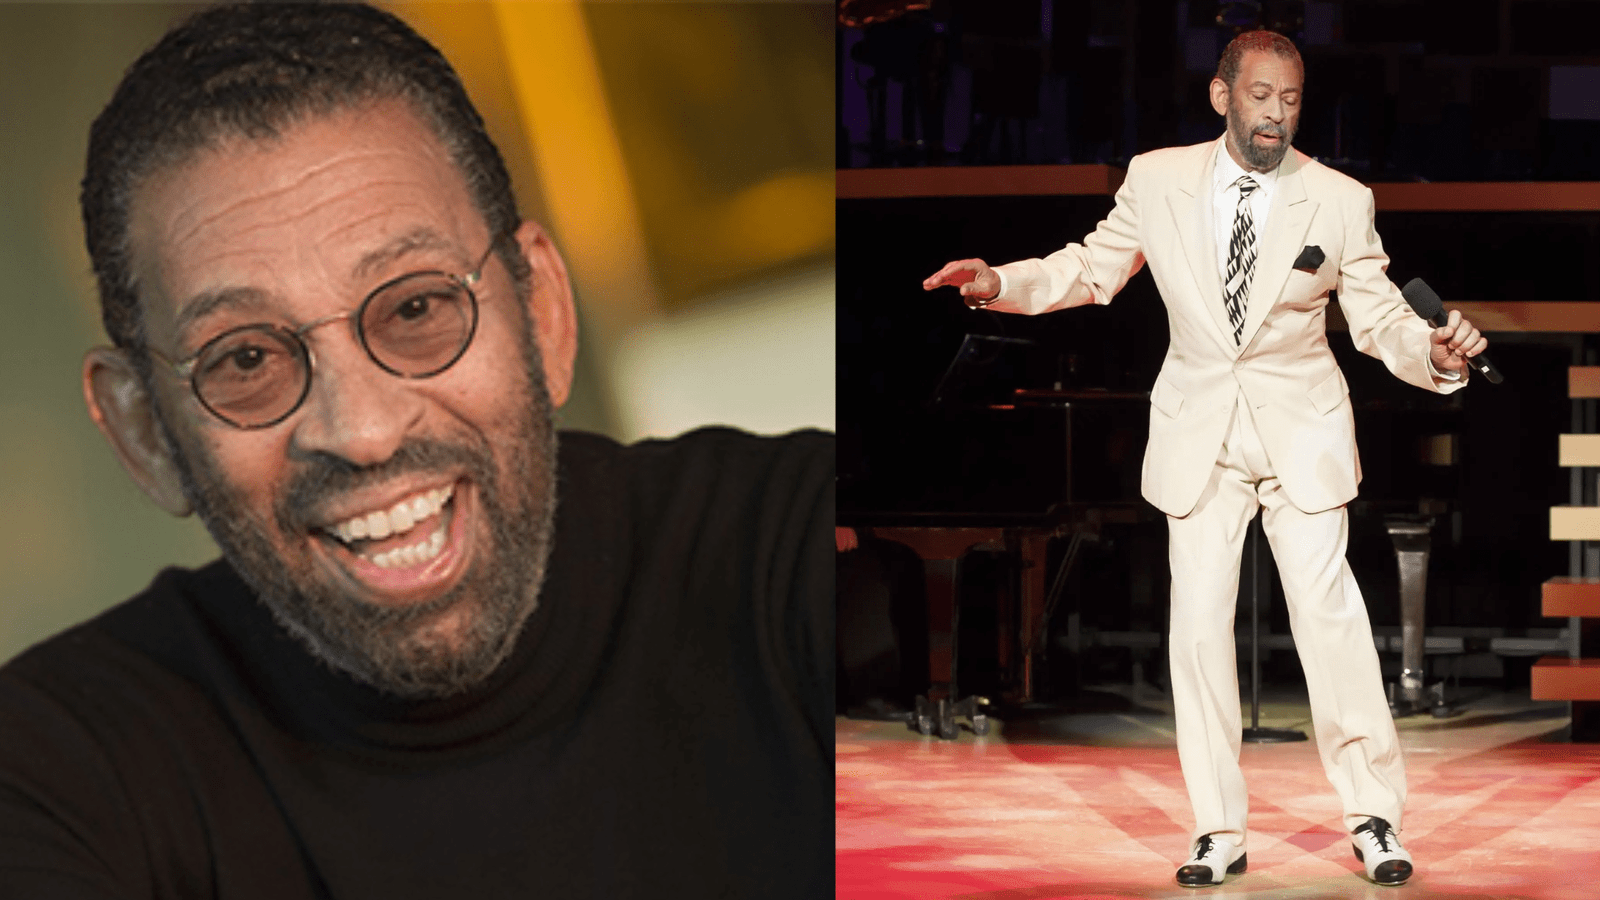 Maurice Hines Life Story – From Birthday to Death